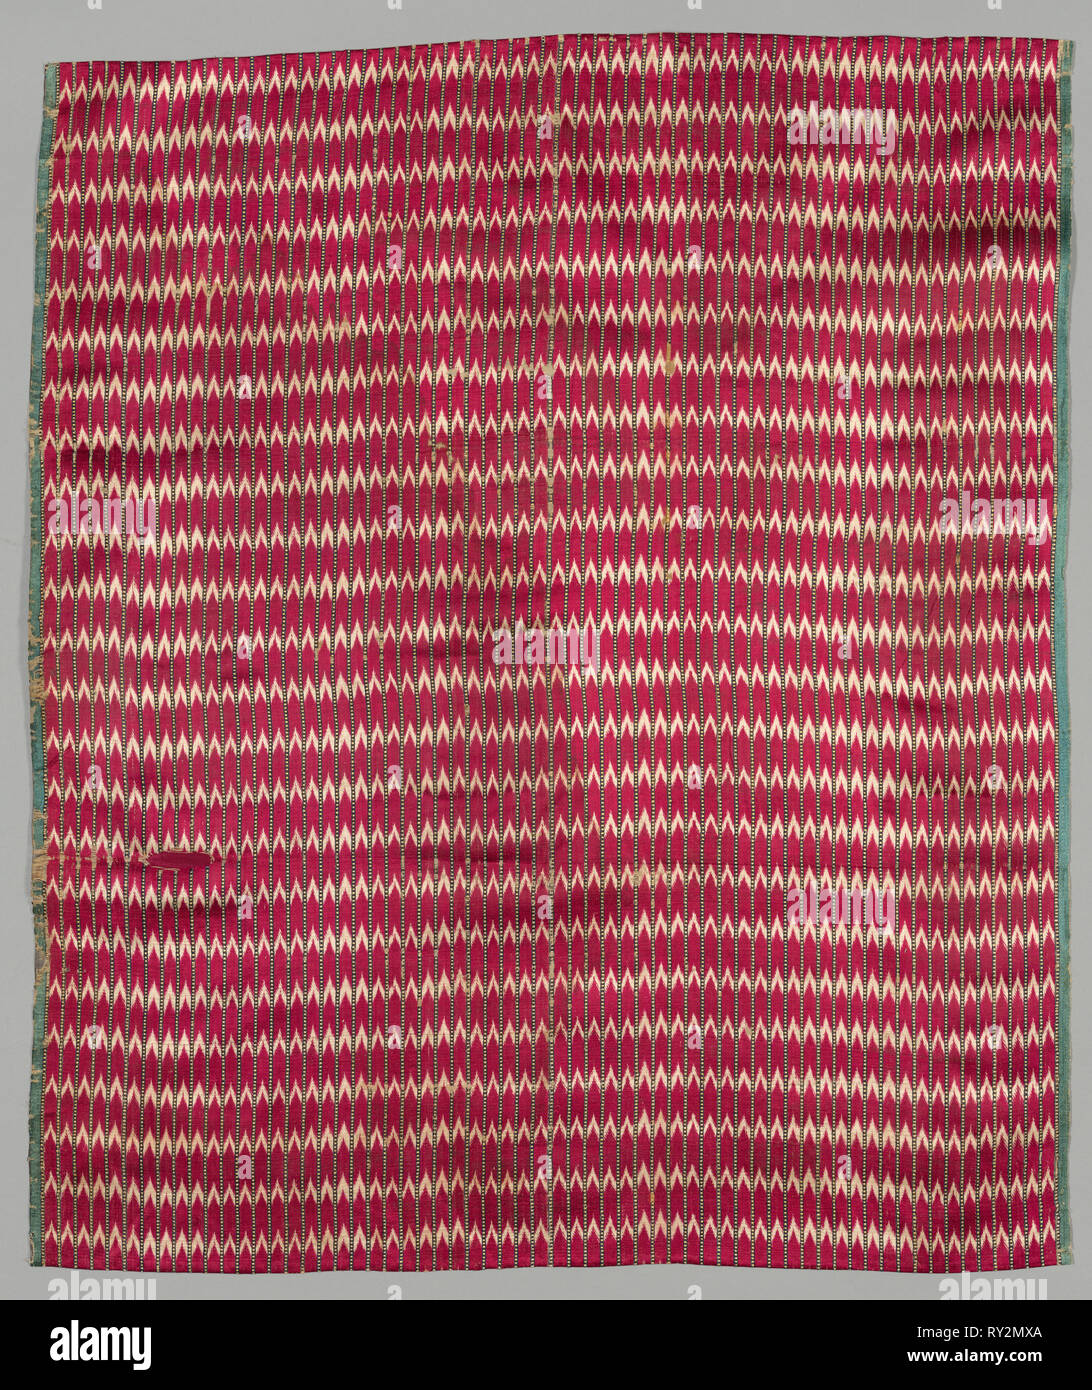 Fragment (Mashru: Textile made for Muslim Market), 1800s - early 1900s. India, Surat, 19th - early 20th century. Warp ikat, satin and complementary warp weave; silk and cotton; overall: 71.1 x 61.9 cm (28 x 24 3/8 in Stock Photo